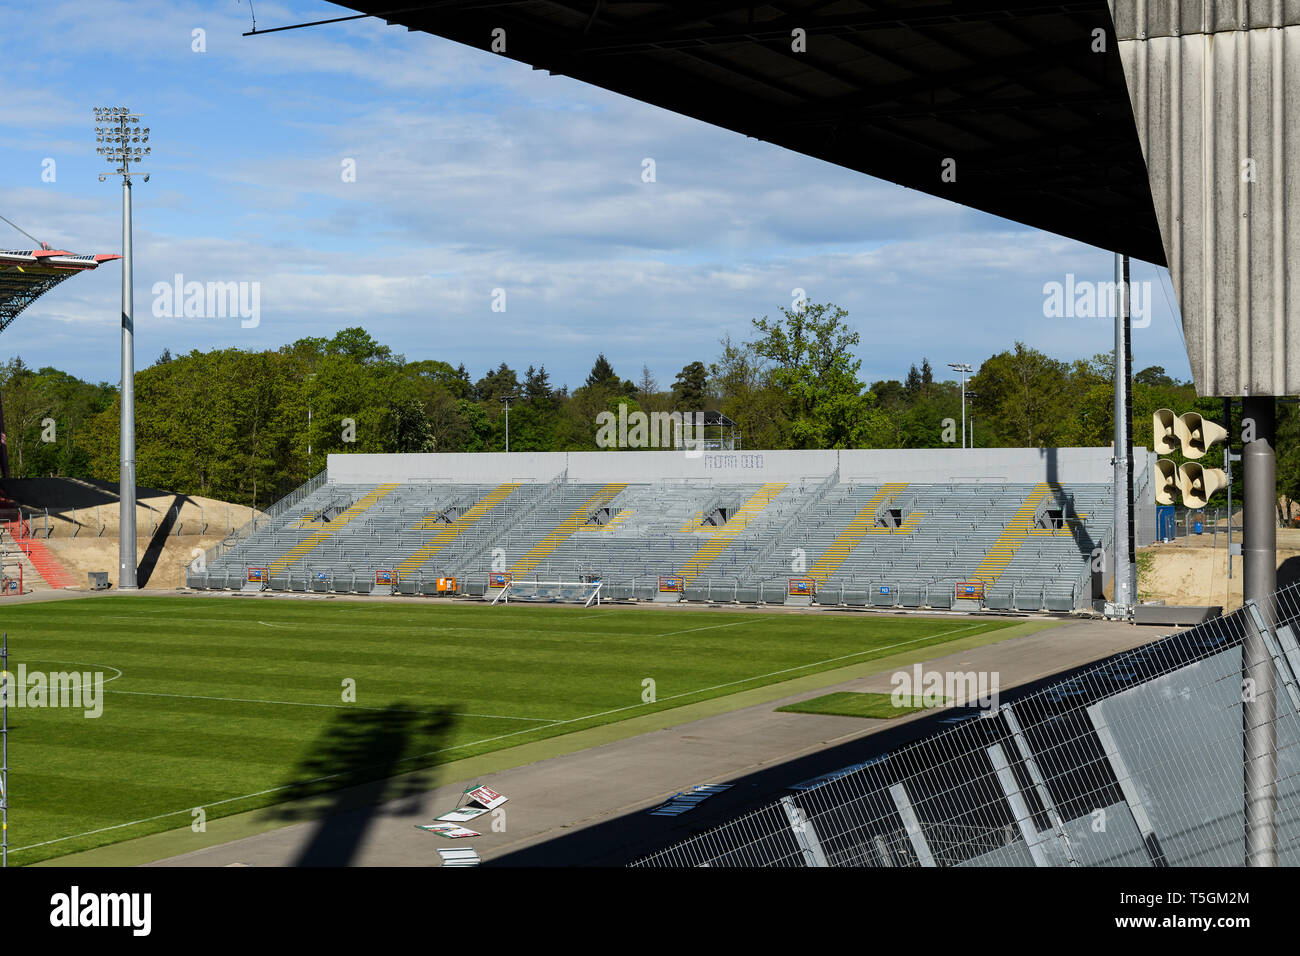 The provisional North Tribune, without roof. GES / football / 3rd league: Karlsruher SC - construction site Wildparkstadion, 25.04.2019 - | usage worldwide Stock Photo